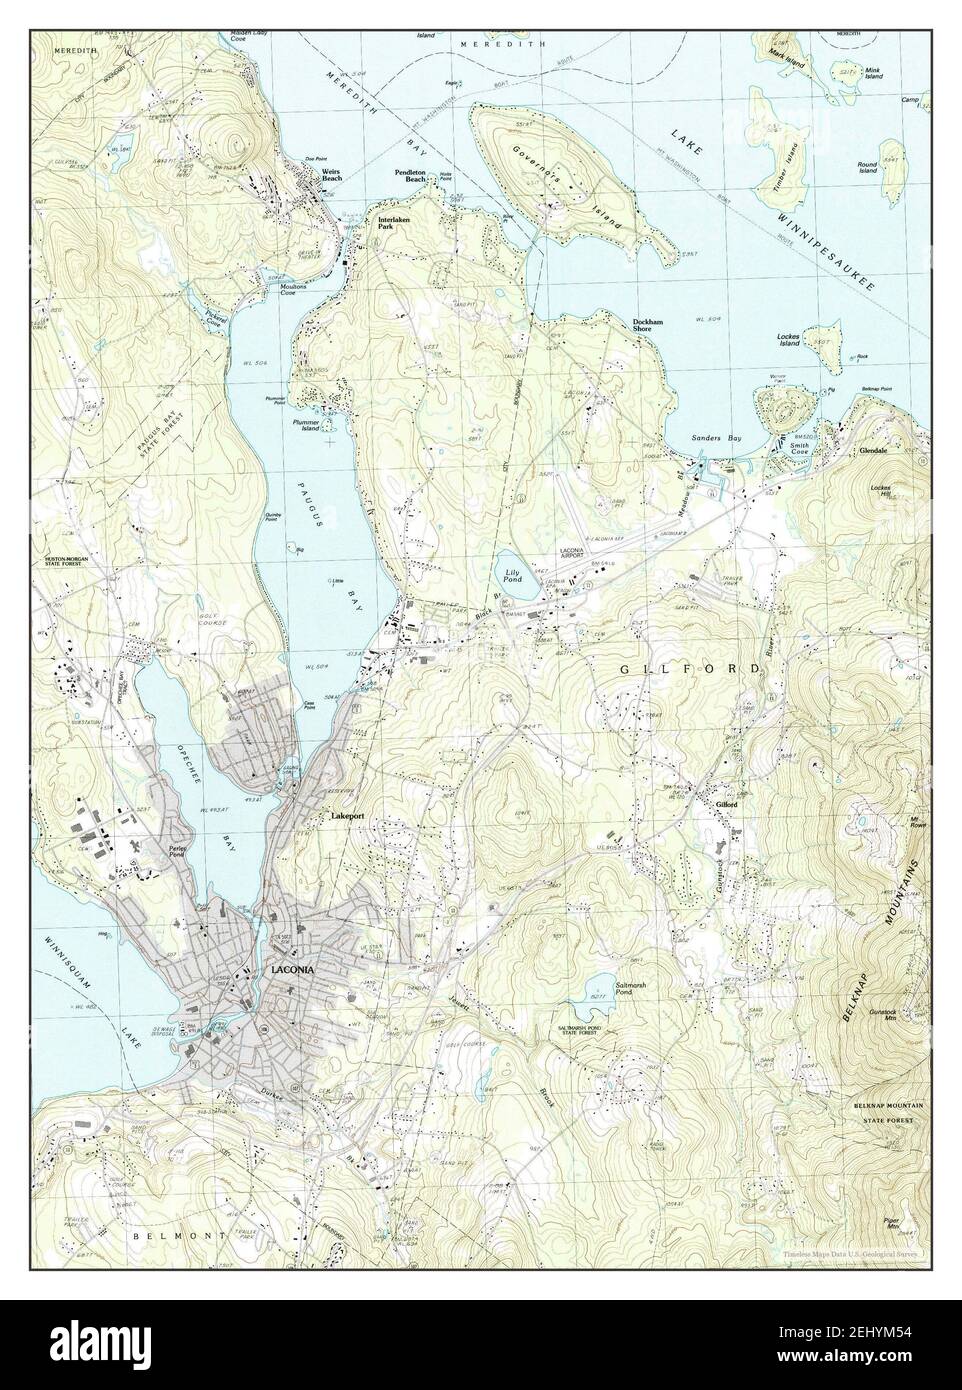 Laconia, New Hampshire, map 1987, 1:24000, United States of America by Timeless Maps, data U.S. Geological Survey Stock Photo